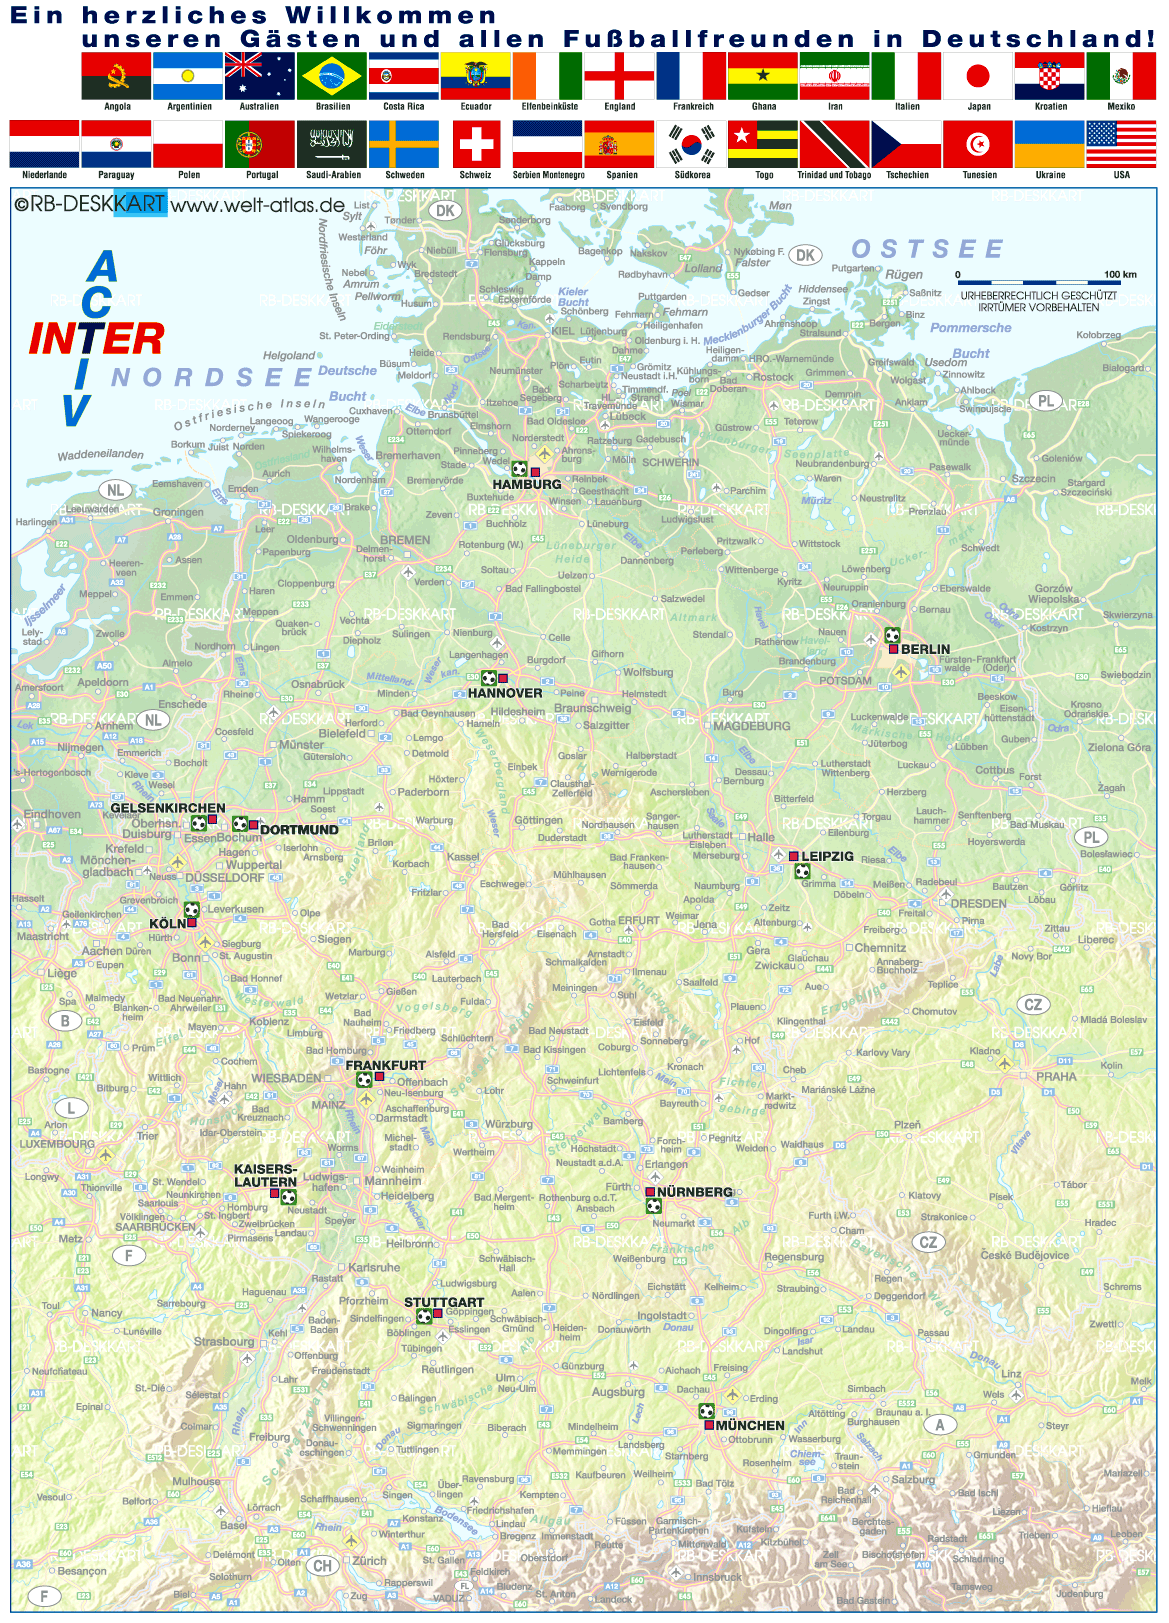 Map of Germany Football Worldcup 2006 (Country)